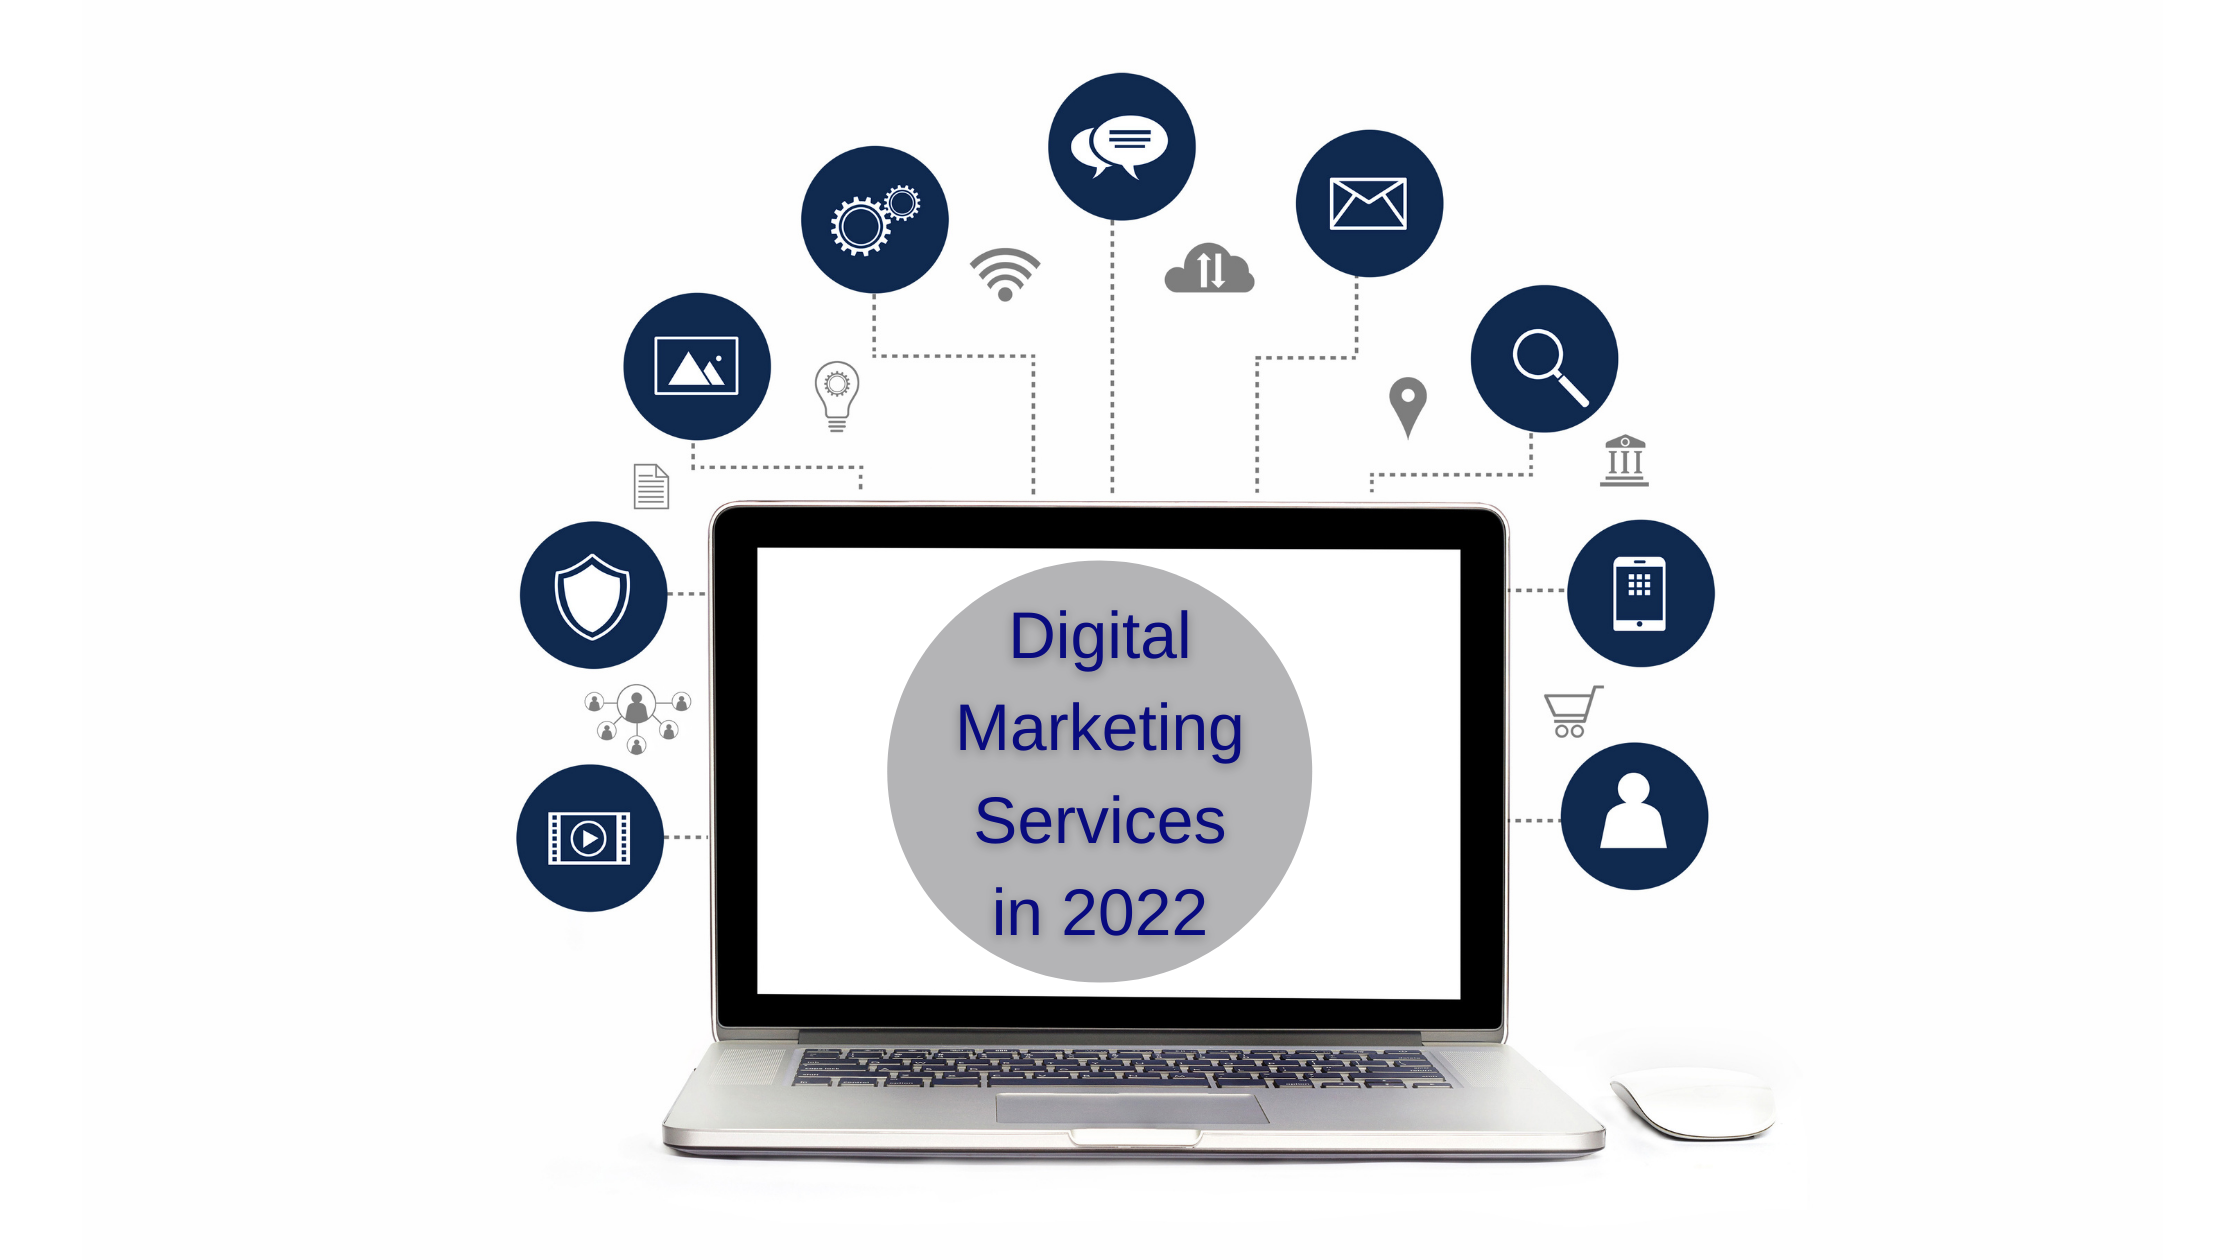 3 Reasons for Digital Marketing Services in 2022